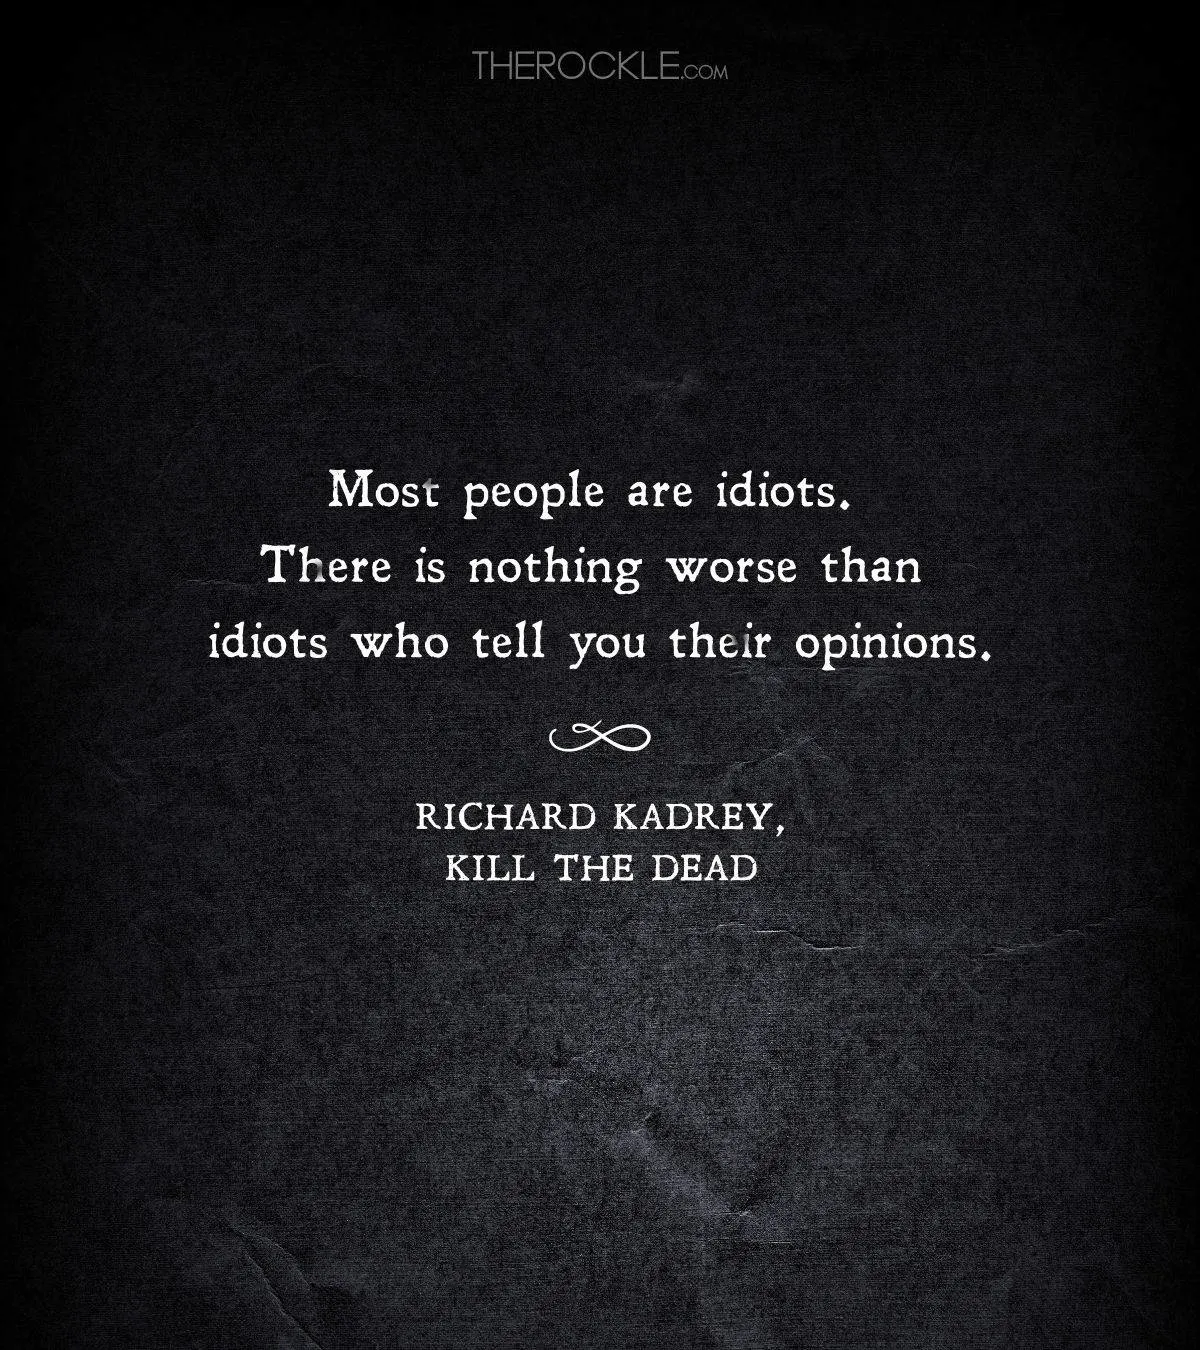 Quote from Richard Kadrey book